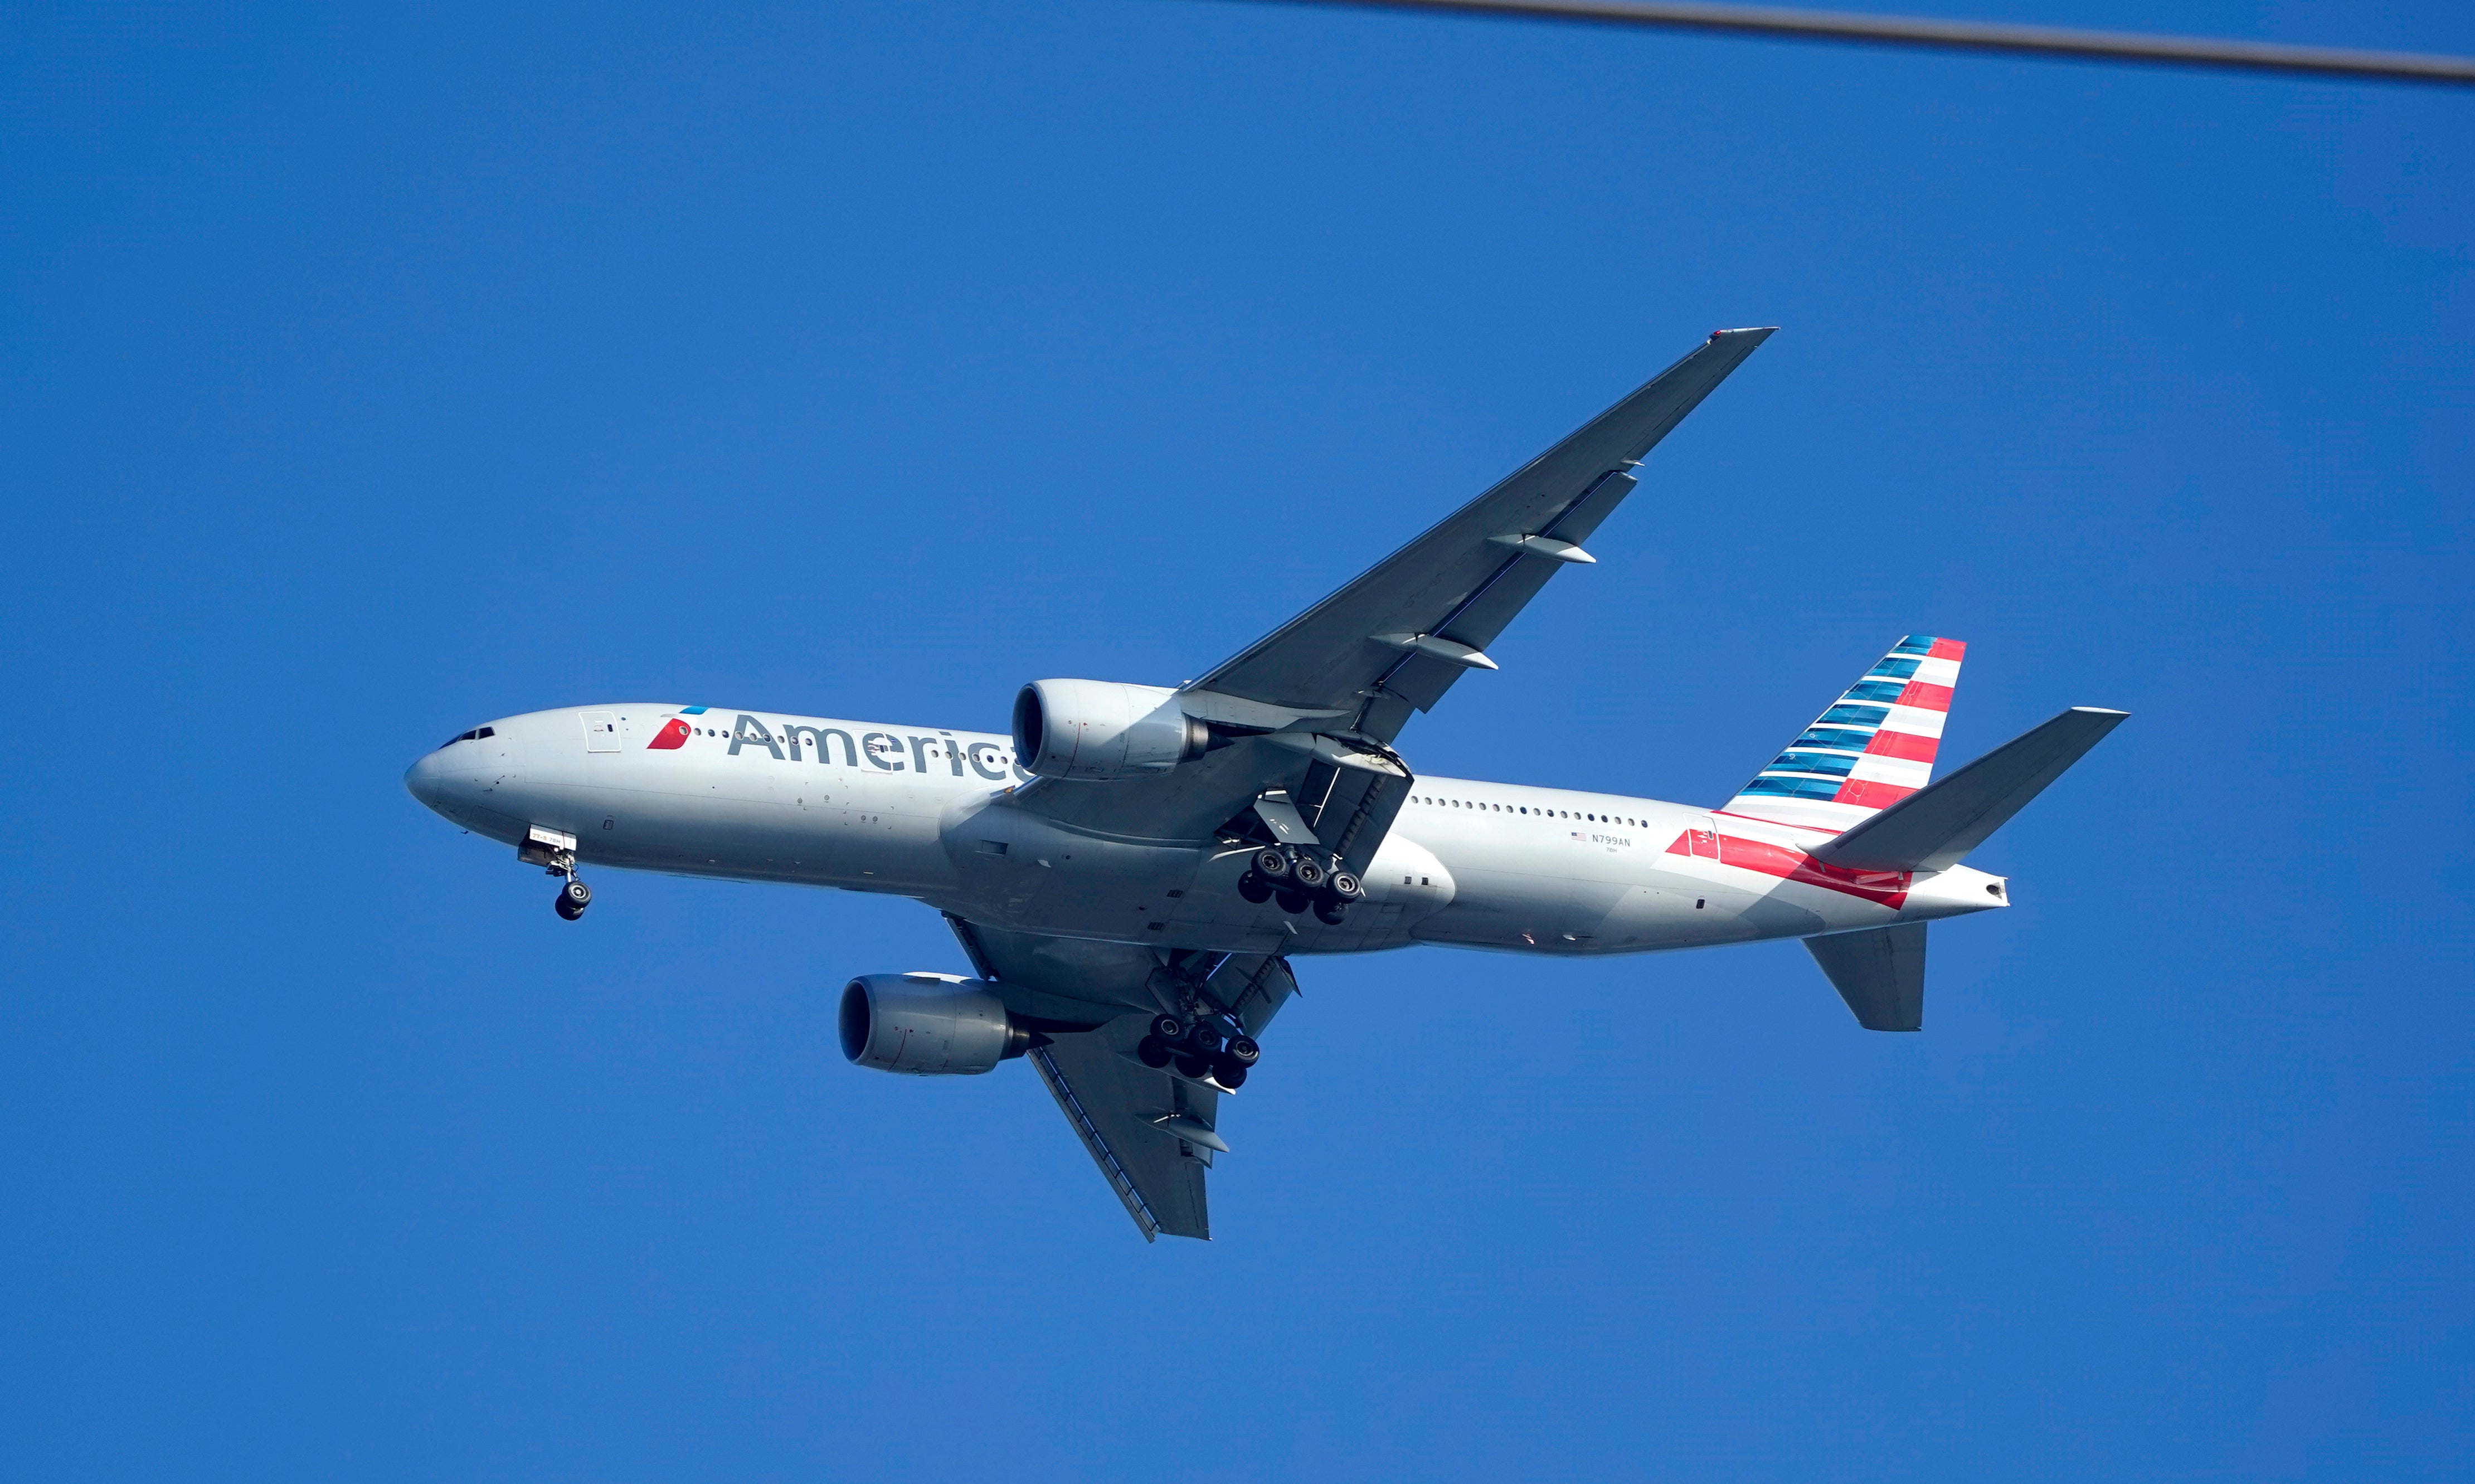 The American Airlines passenger has been sued for nealry $82,000